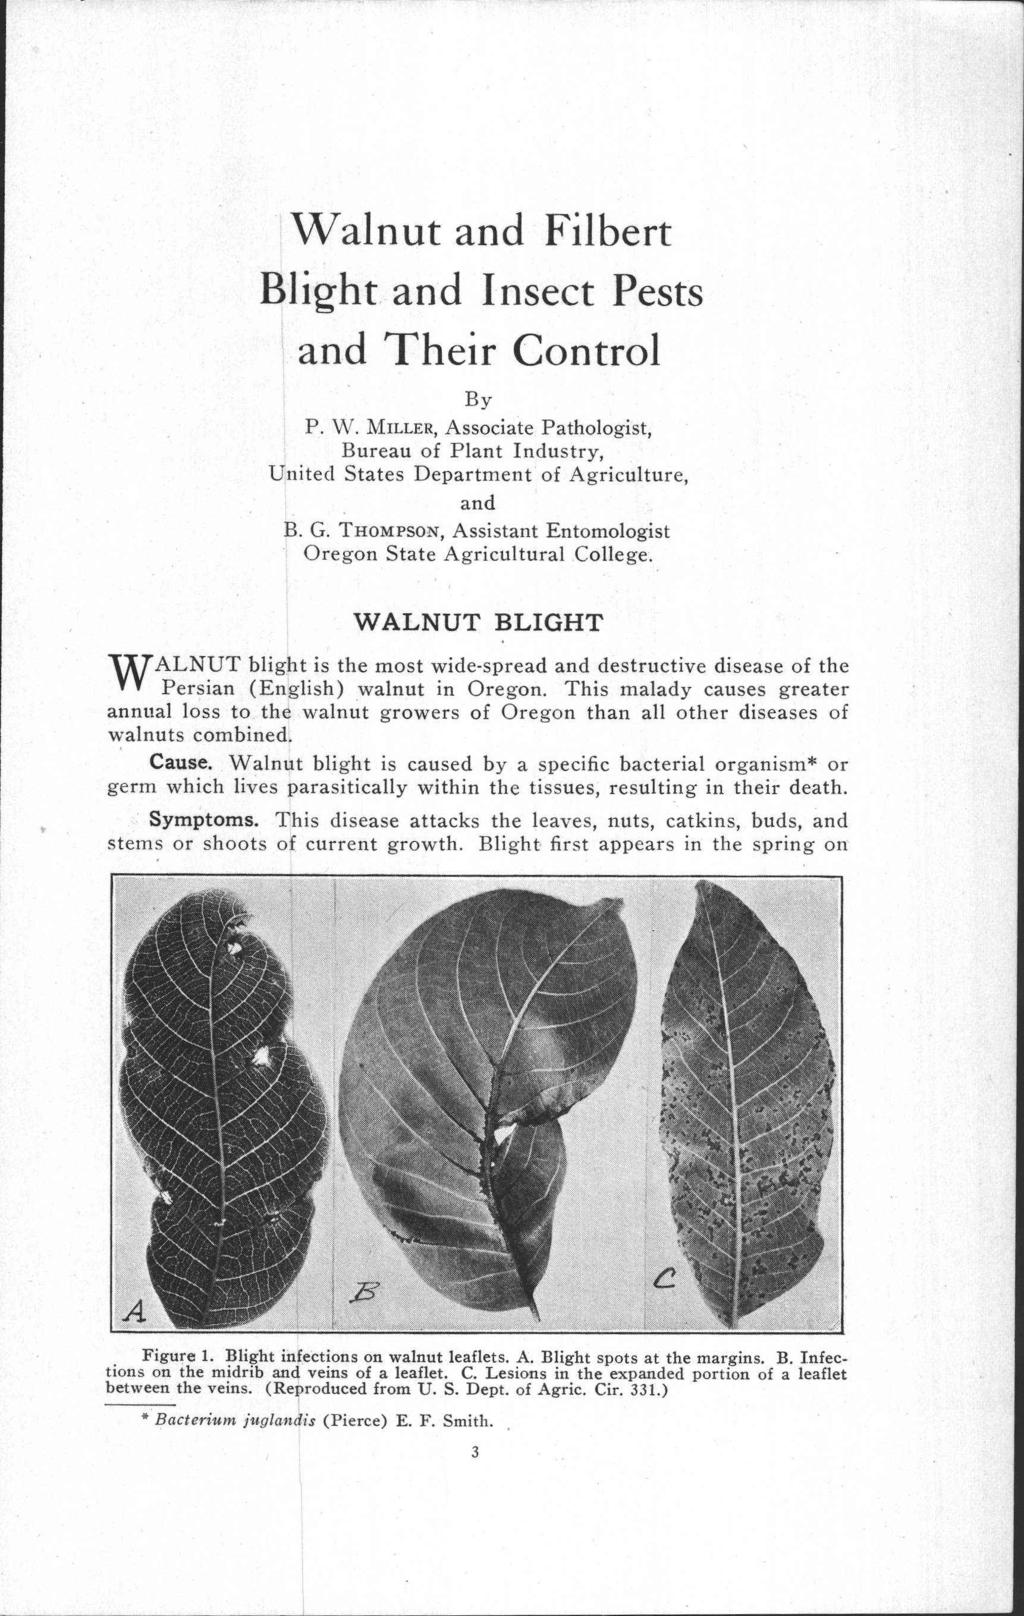 Walnut and Filbert Blight and Insect Pests and Their Control By P. W. MILLER, Associate Pathologist, Bureau of Plant Industry, United States Department of Agriculture, and B. G.